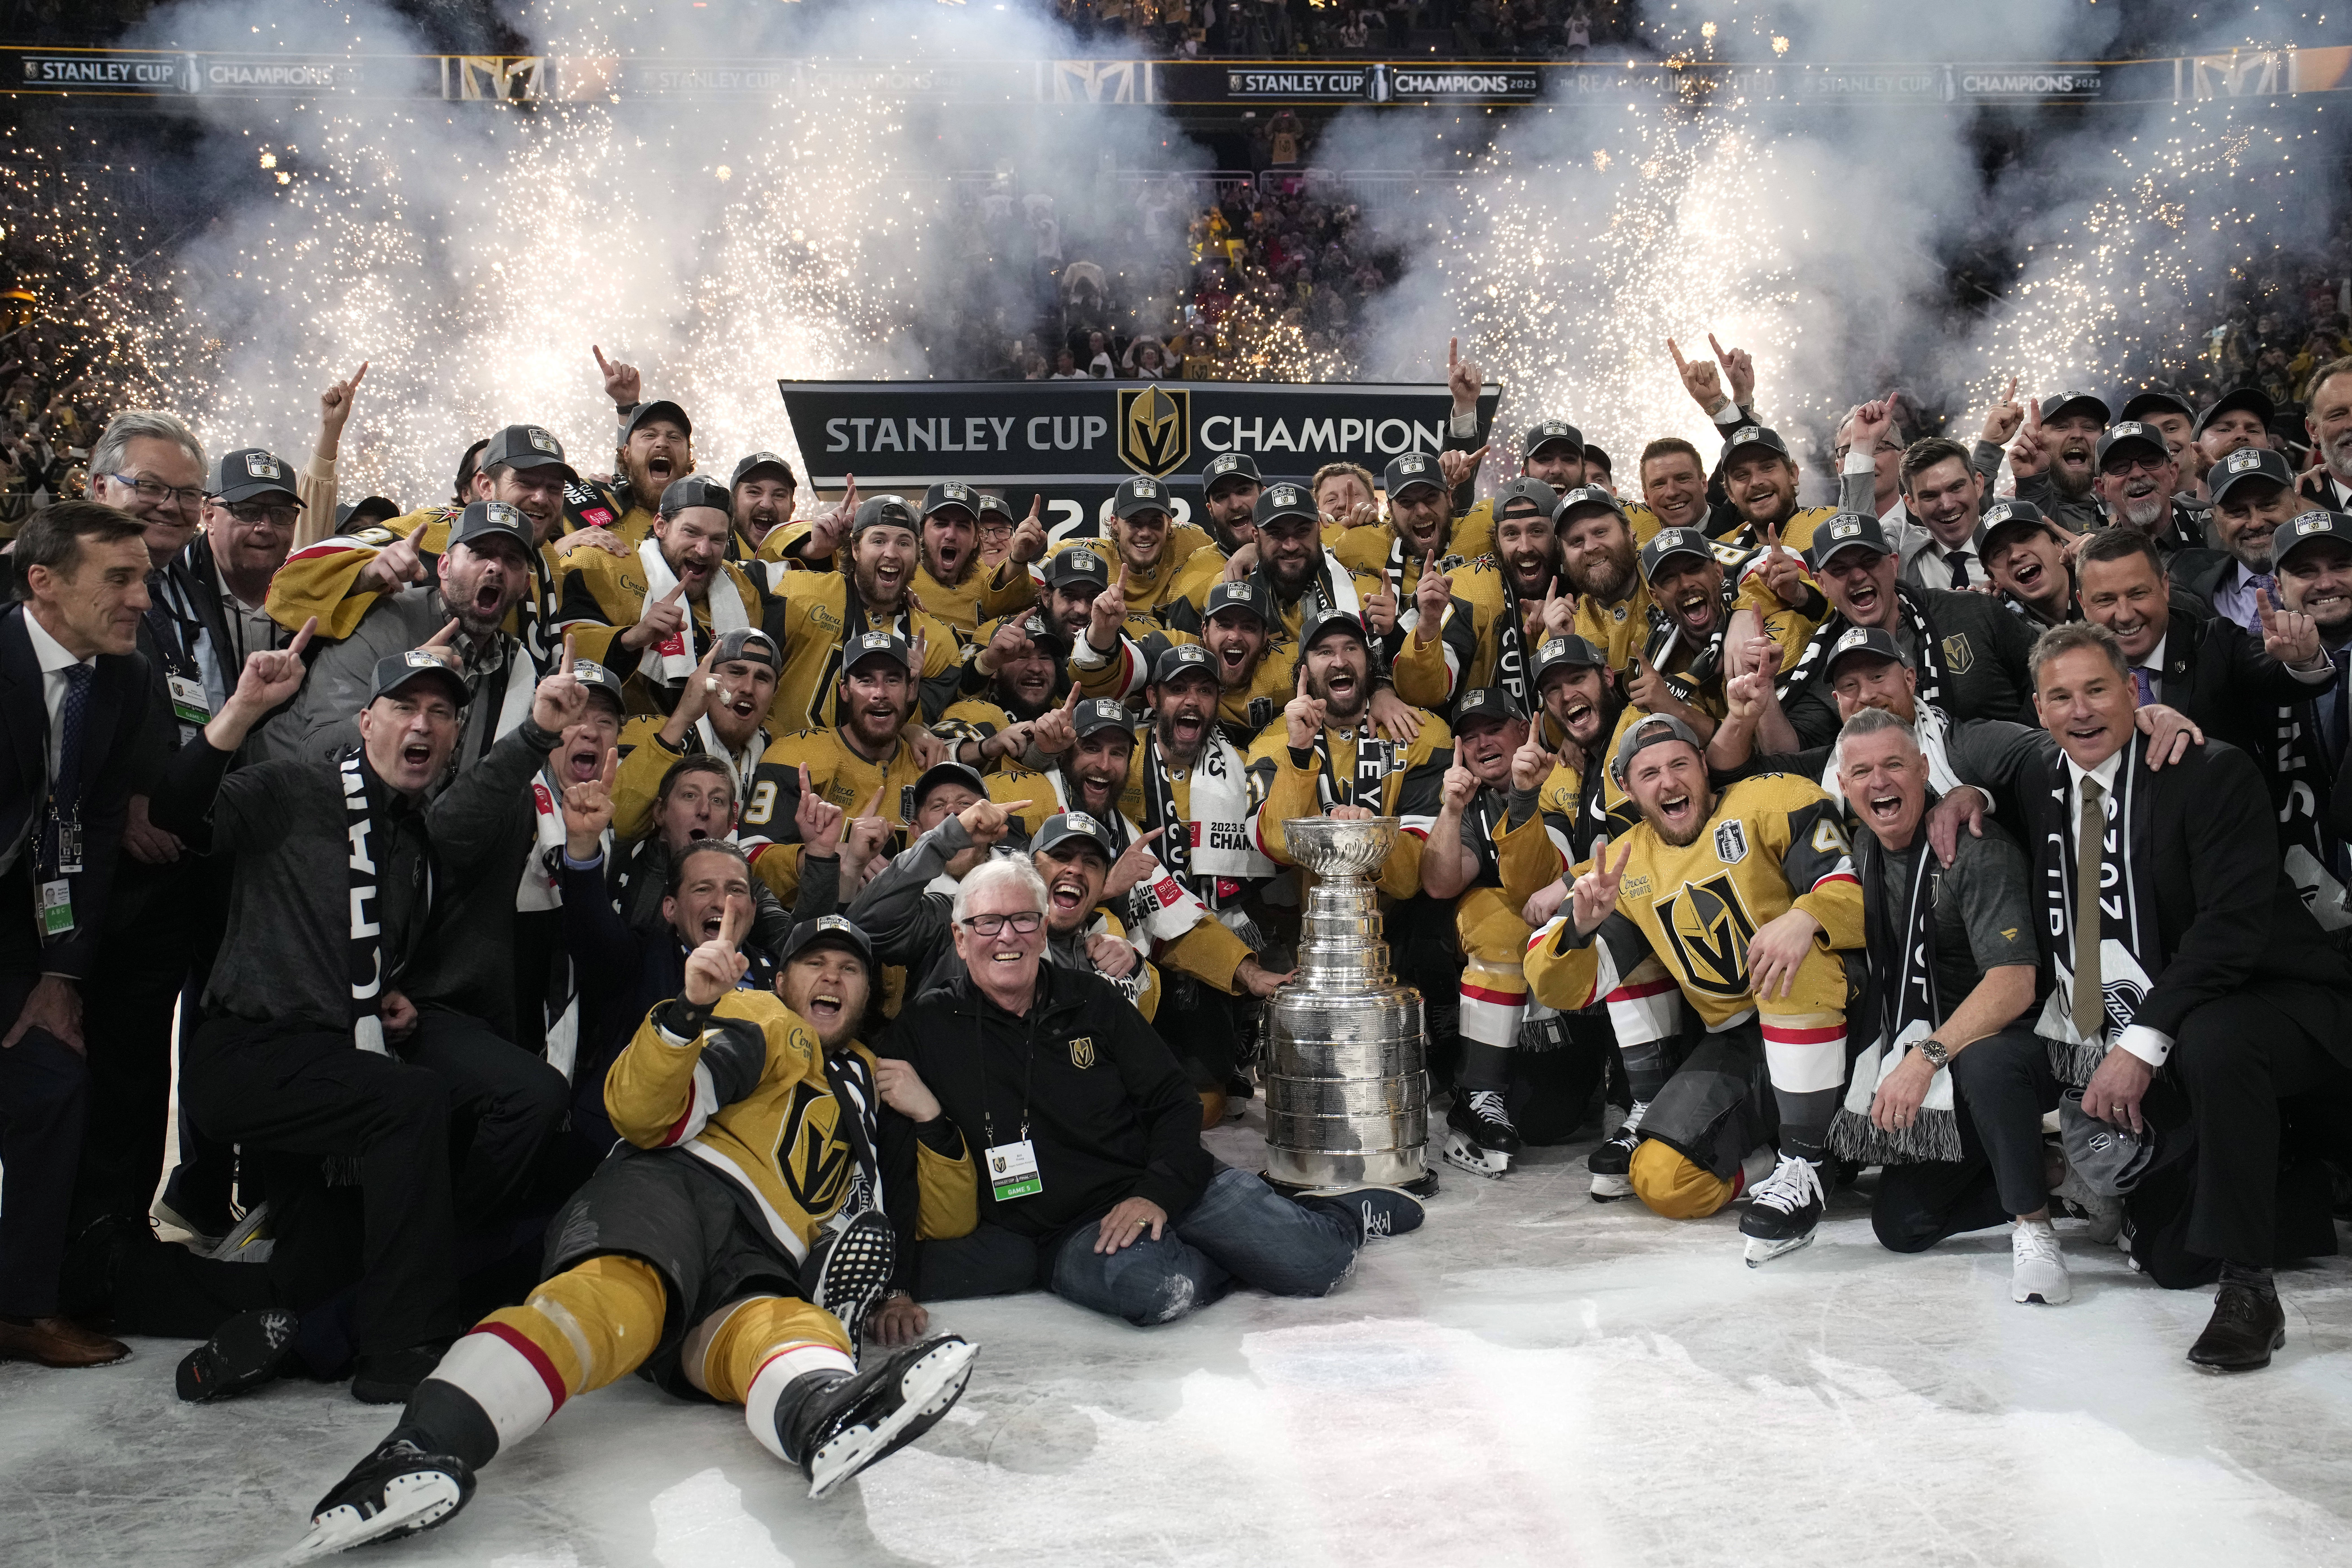 The Stanley cup is taking the world by storm, but not in the way you think